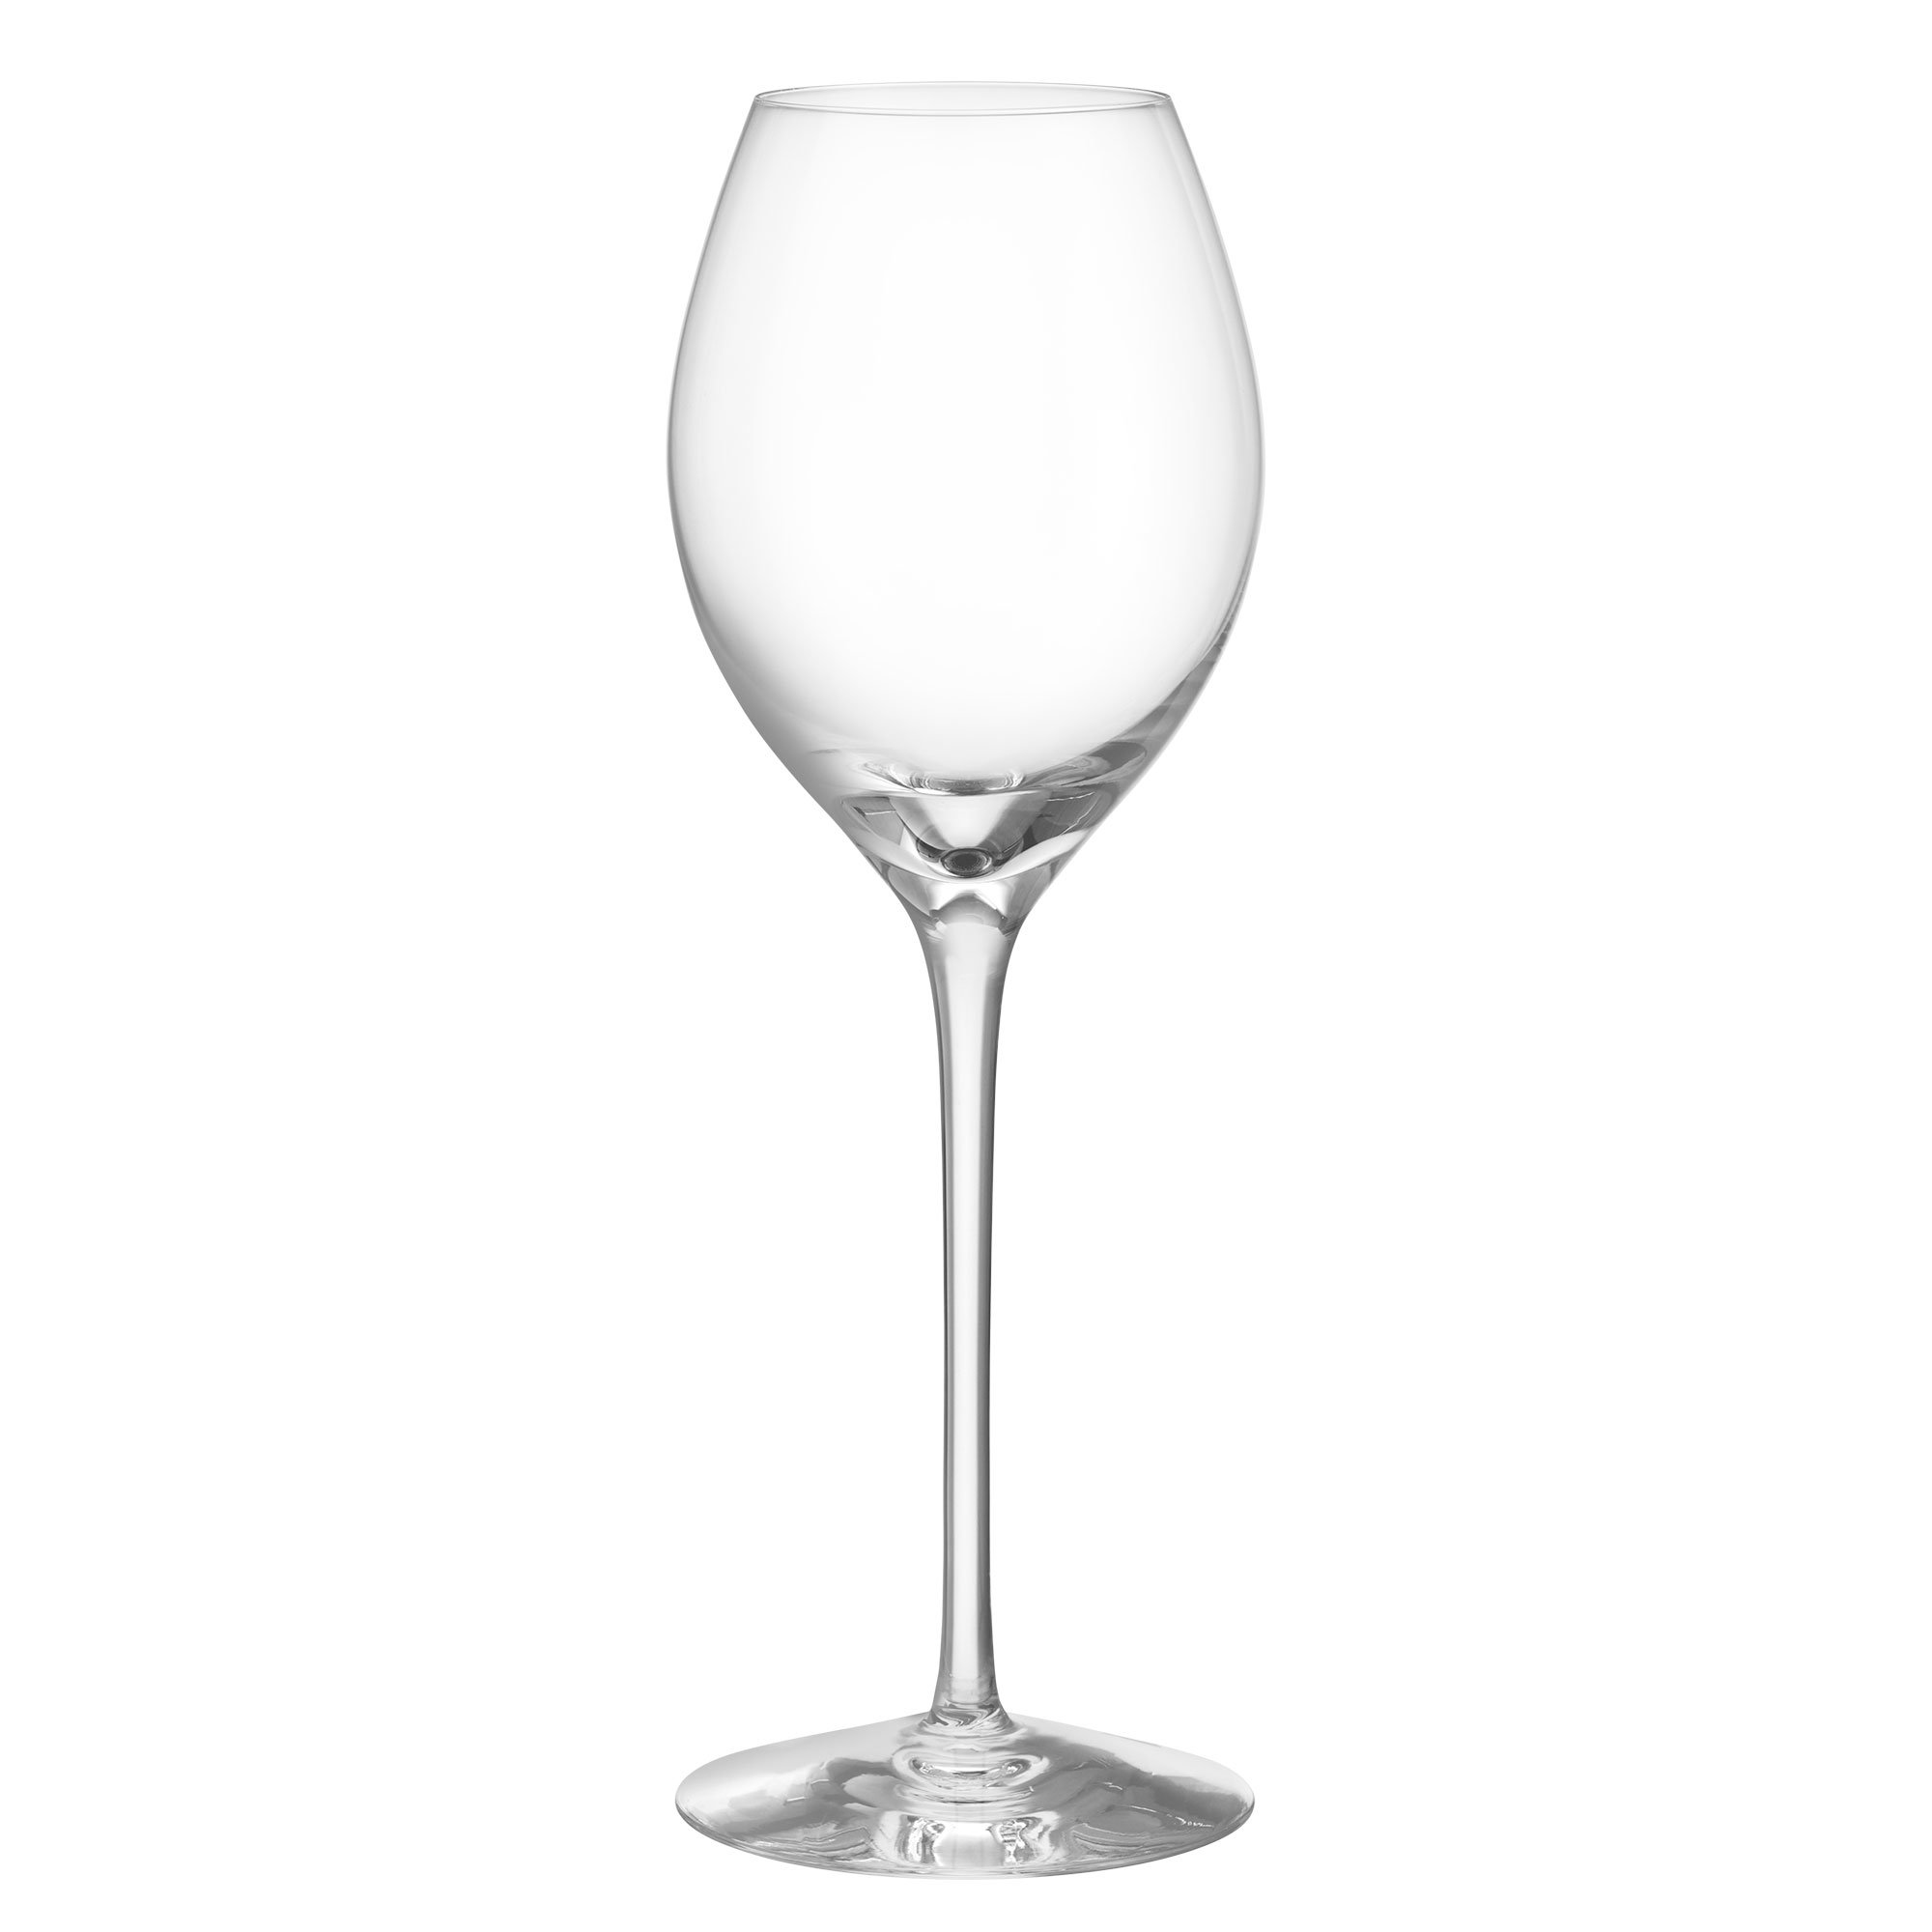 Orrefors More Champagne Boule glas 31 cl 4 stk.